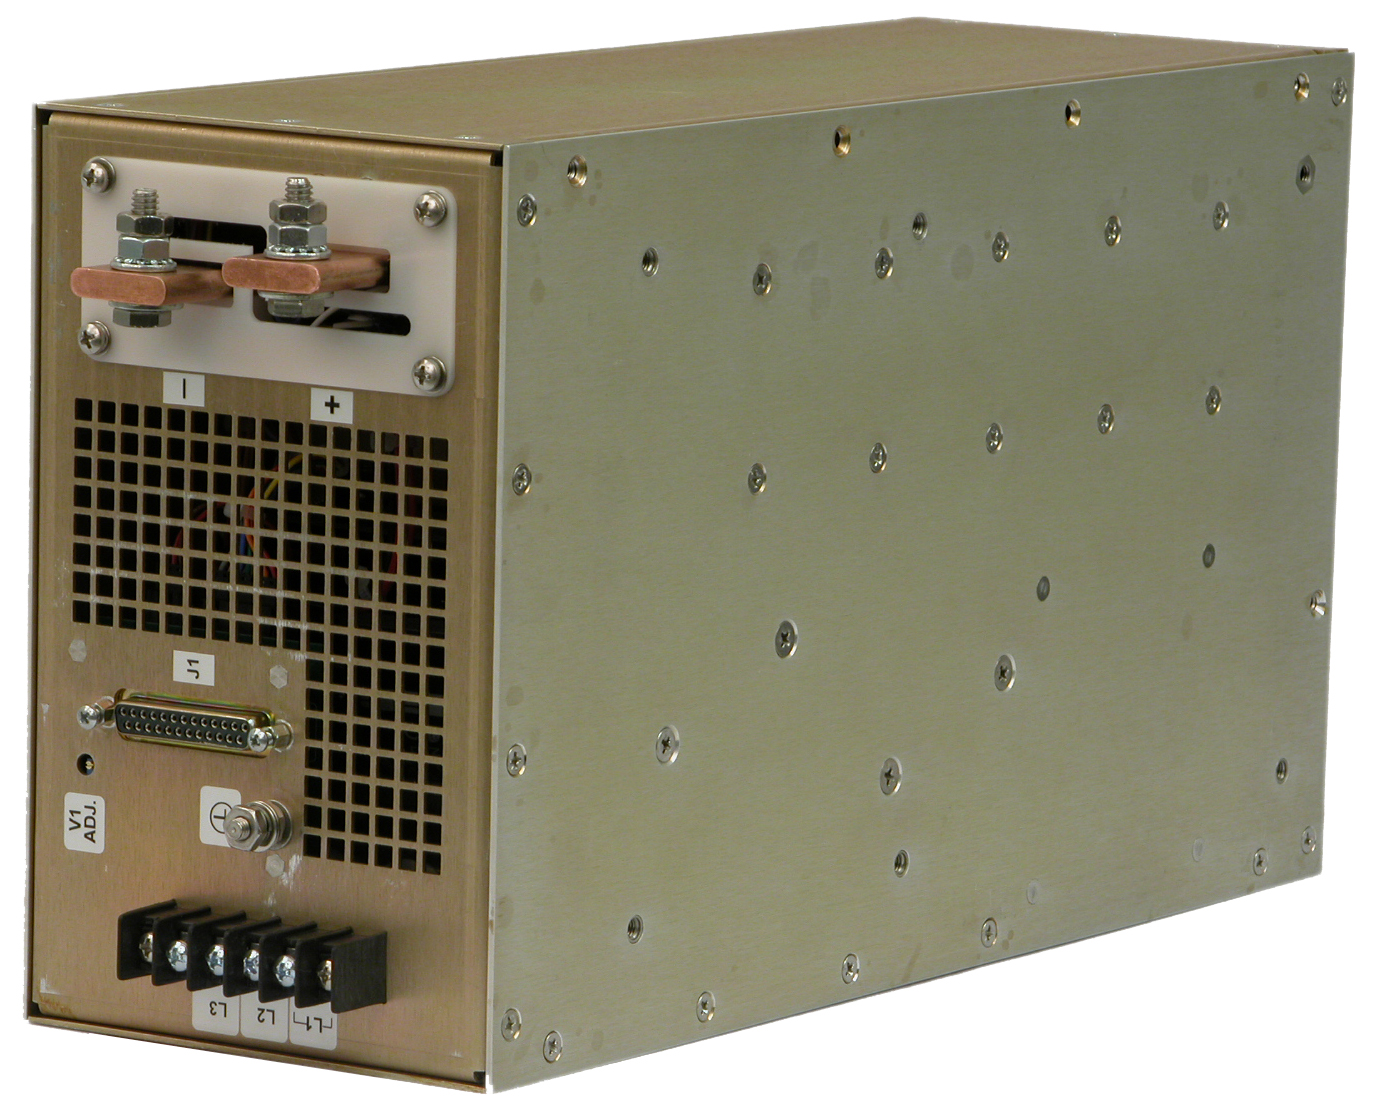 Behlman DCA2000 COTS Power Supplies deliver DC outputs from 3.3 VDC to 100 VDC, from a unit designed to withstand the extreme rigors of military shipboard, airborne and mobile operations.